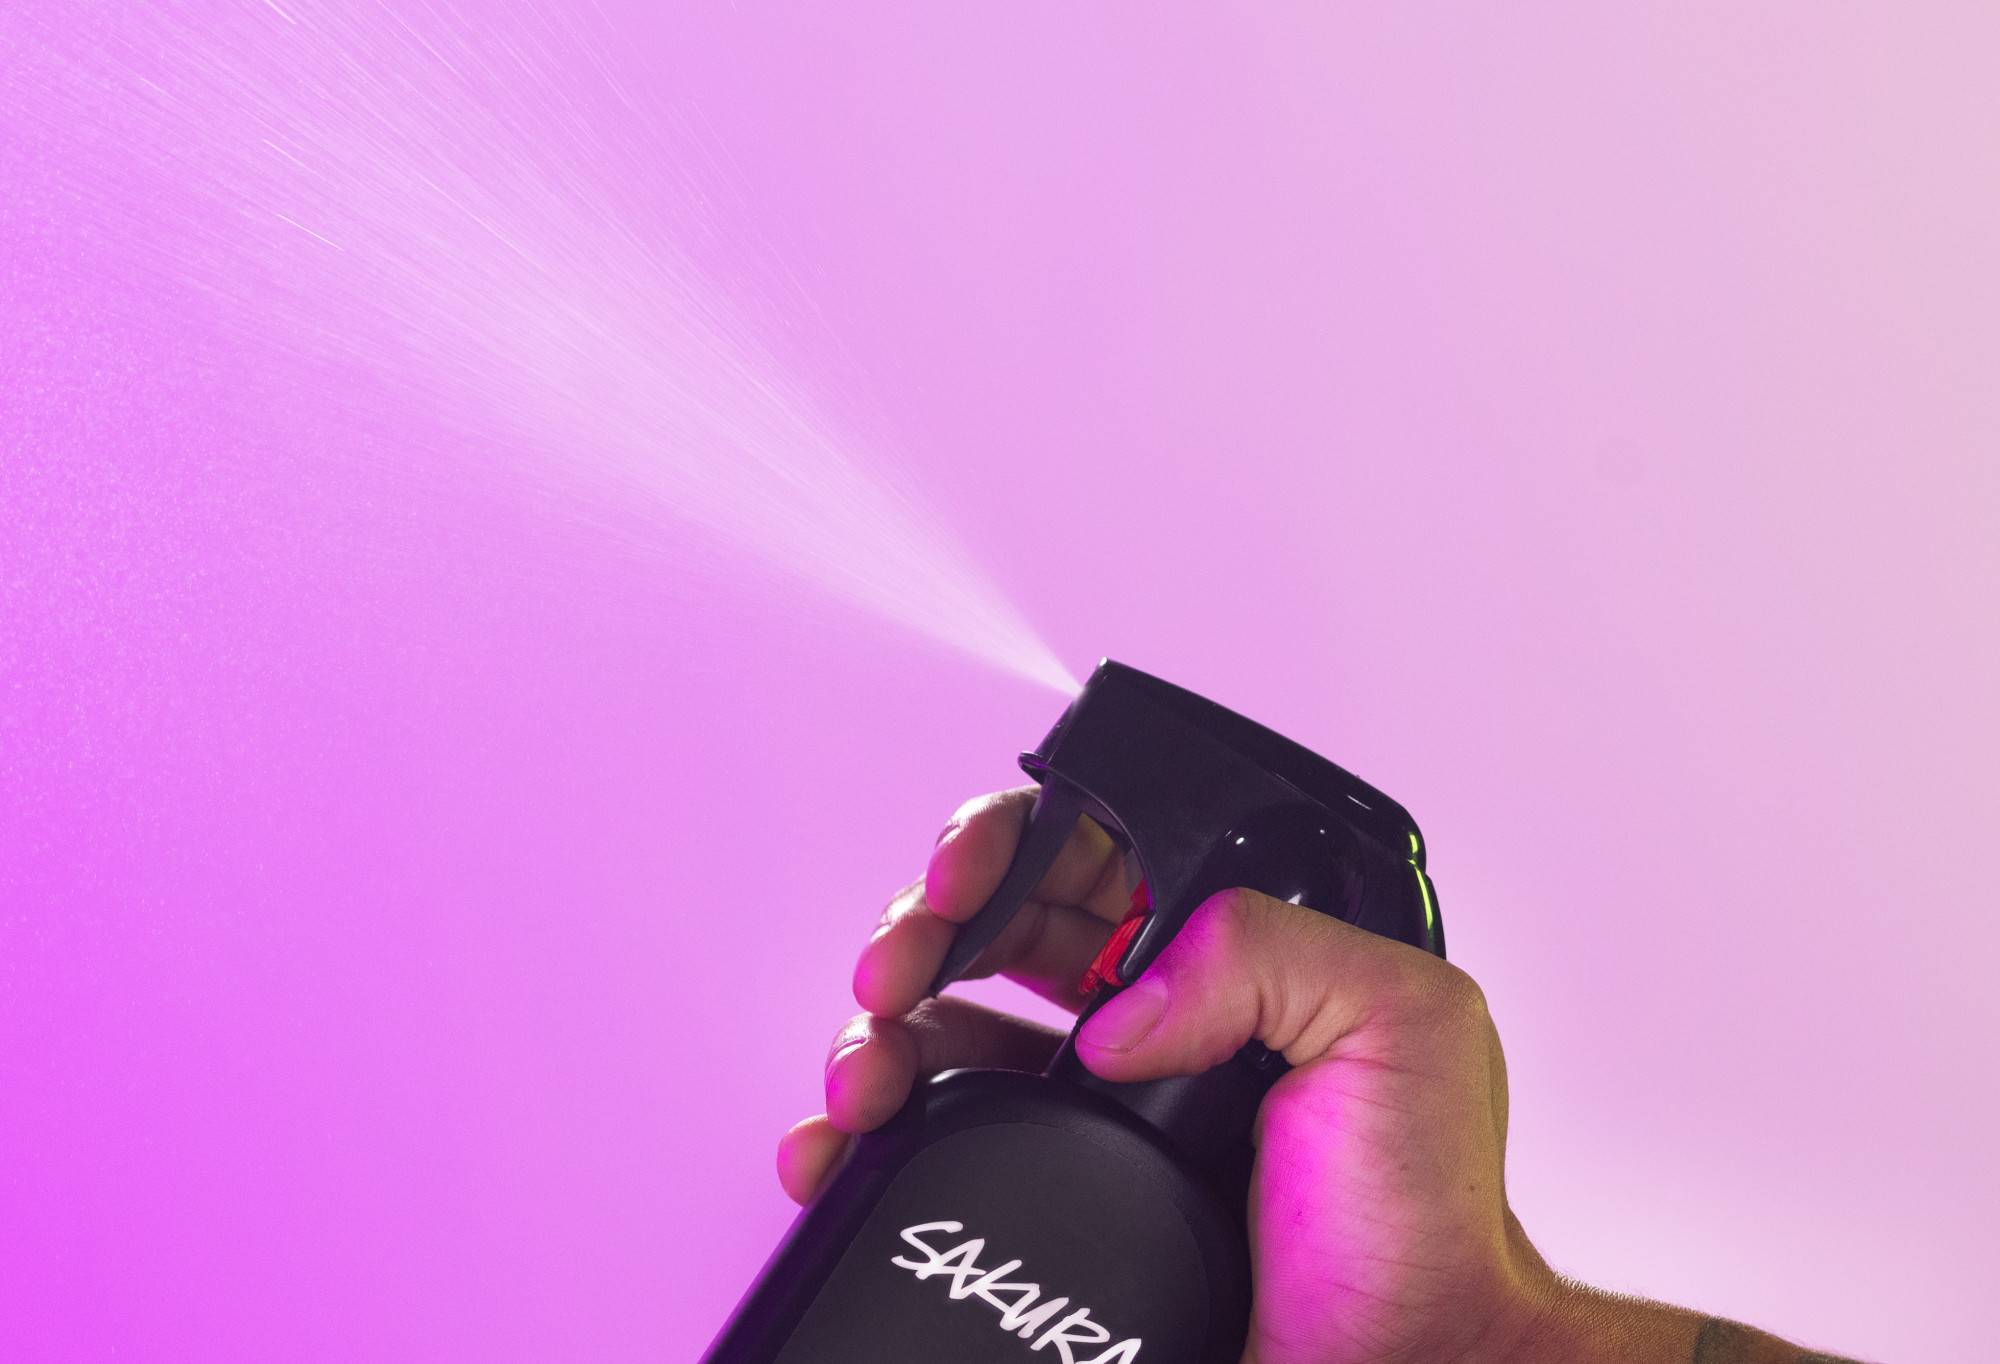 Sakura body spray is sprayed up into the air, in front of a vibrant, light purple background.